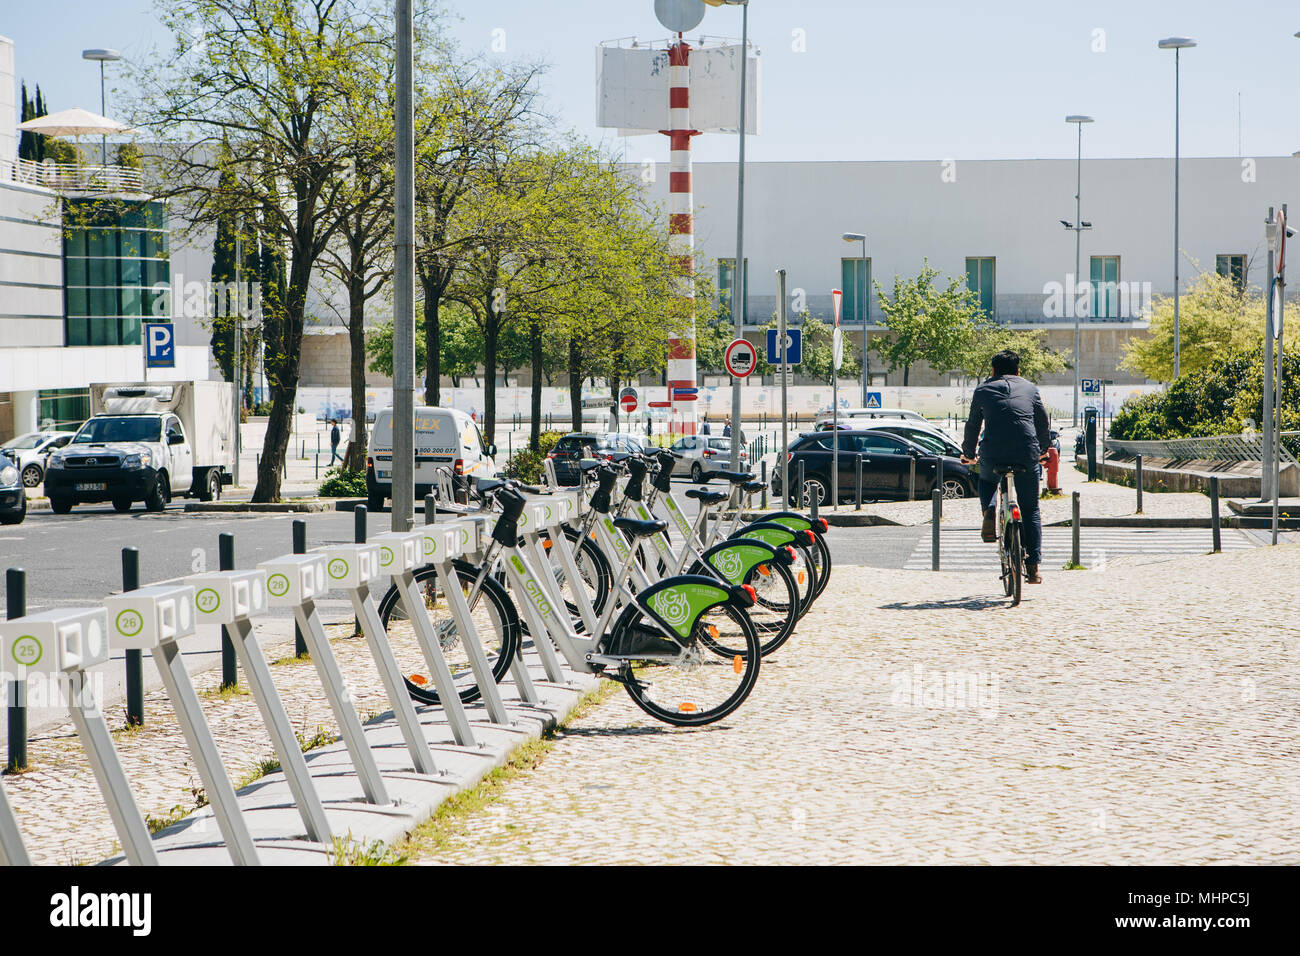 Portugal, Lisbon 29 april 2018: city bicycles or alternative ecological public transport. A person takes a bicycle for rent. Stock Photo